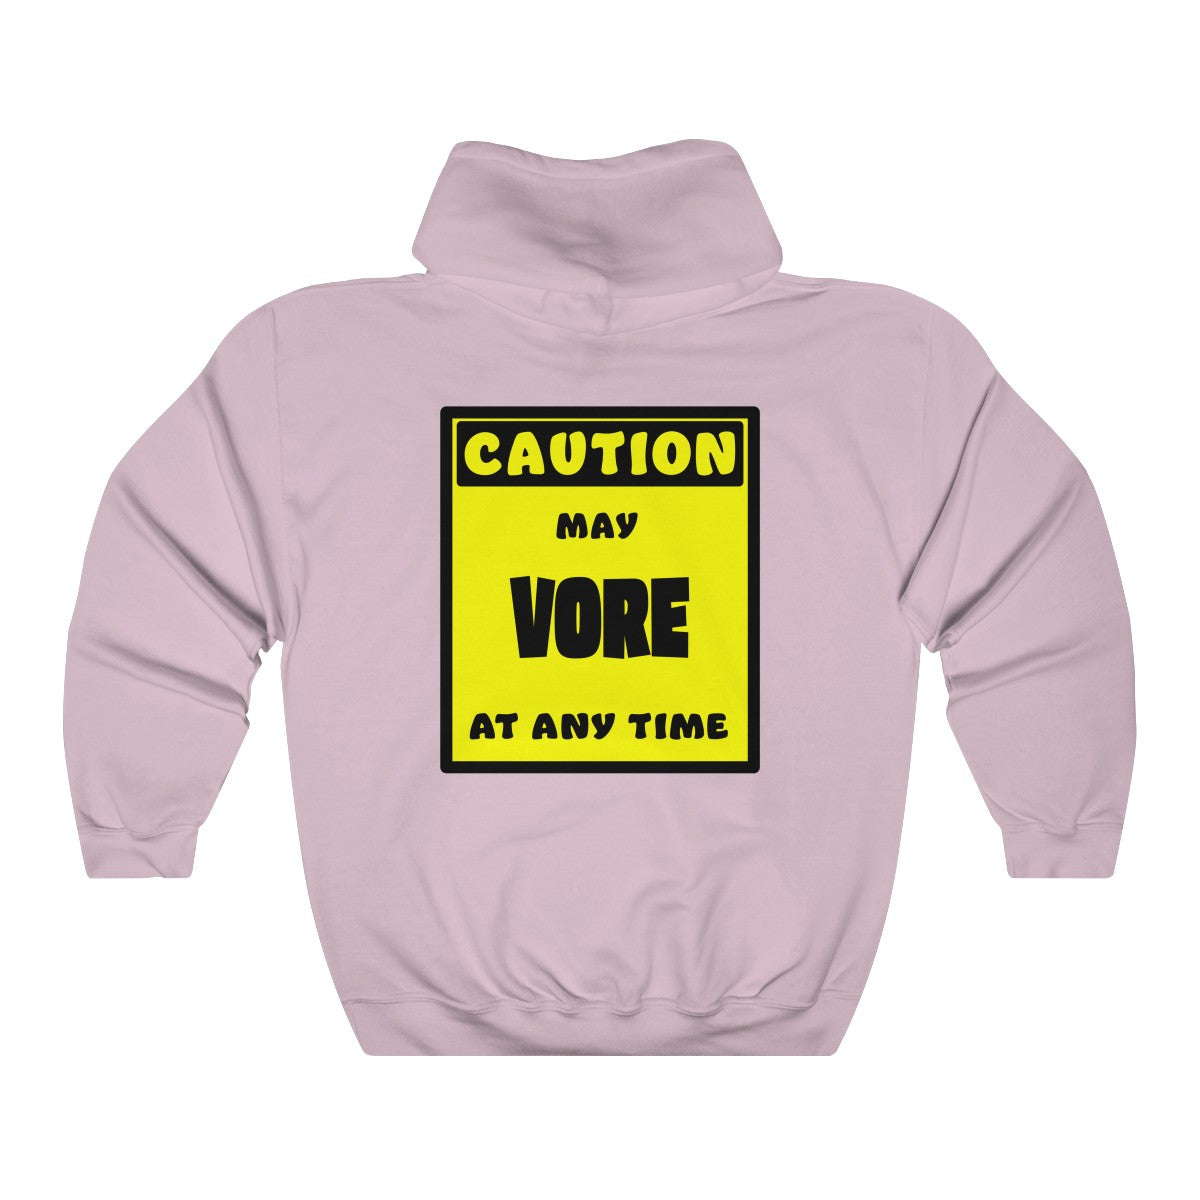 CAUTION! May VORE at any time! - Hoodie Hoodie AFLT-Whootorca Light Pink S 